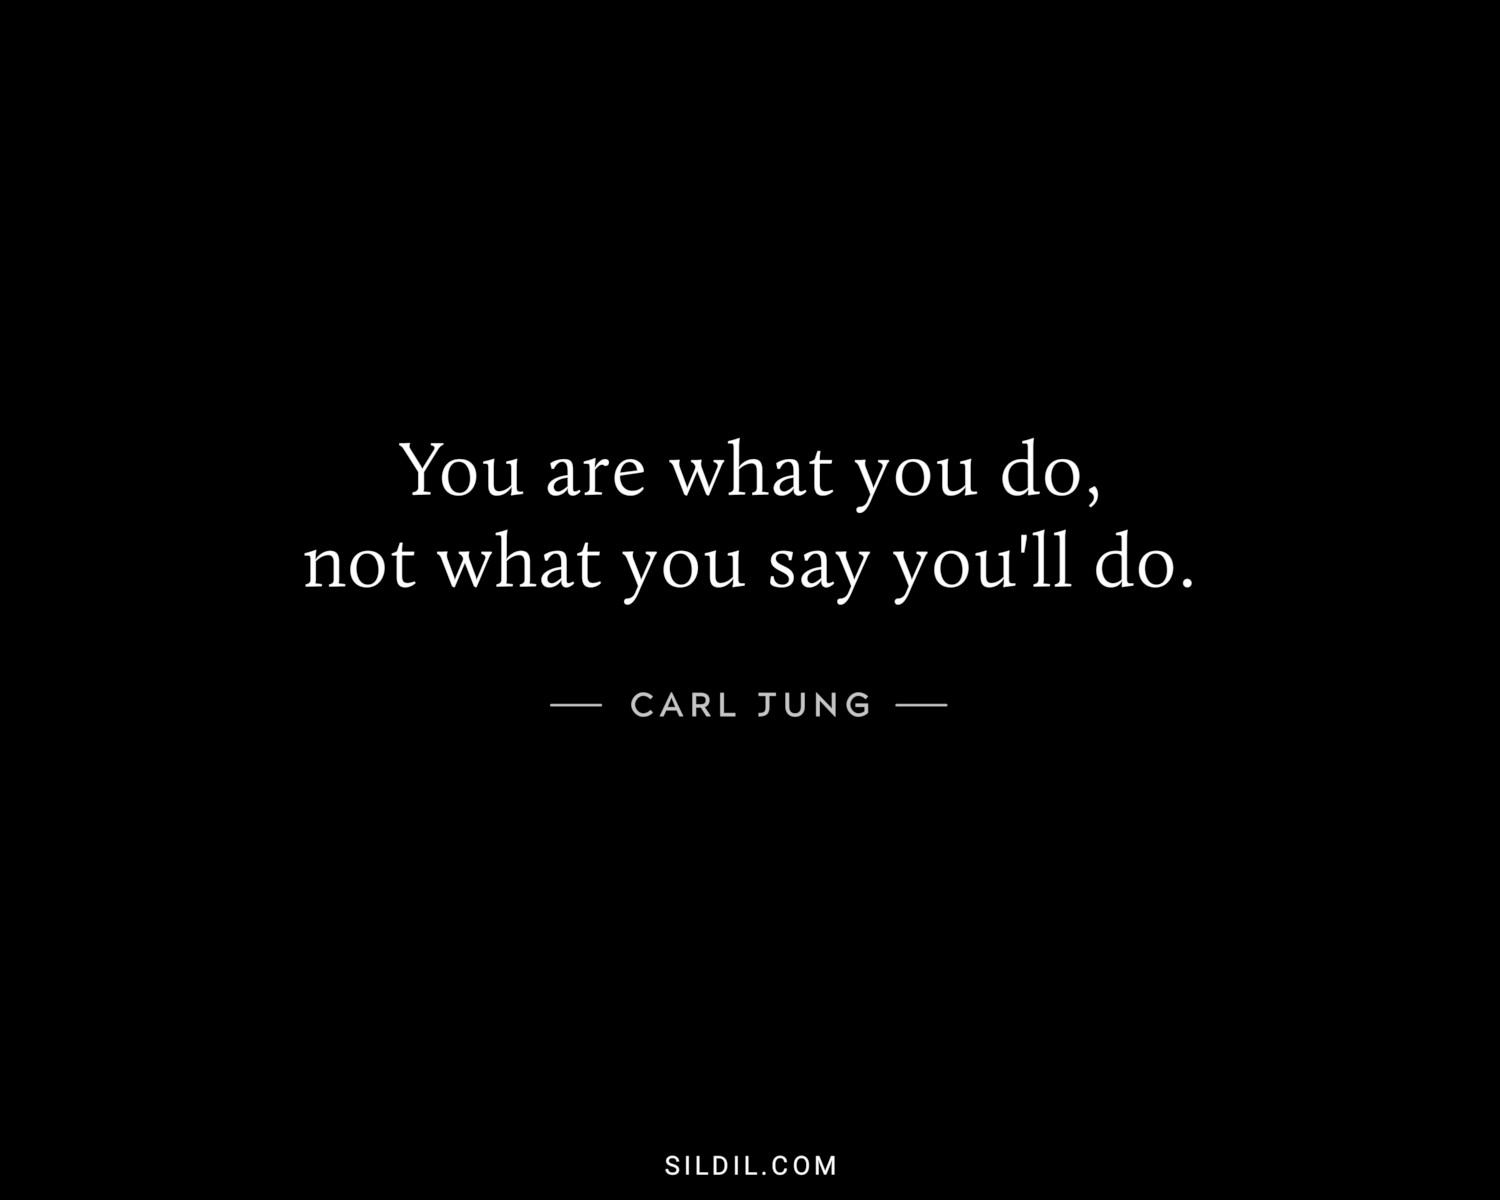 You are what you do, not what you say you'll do.